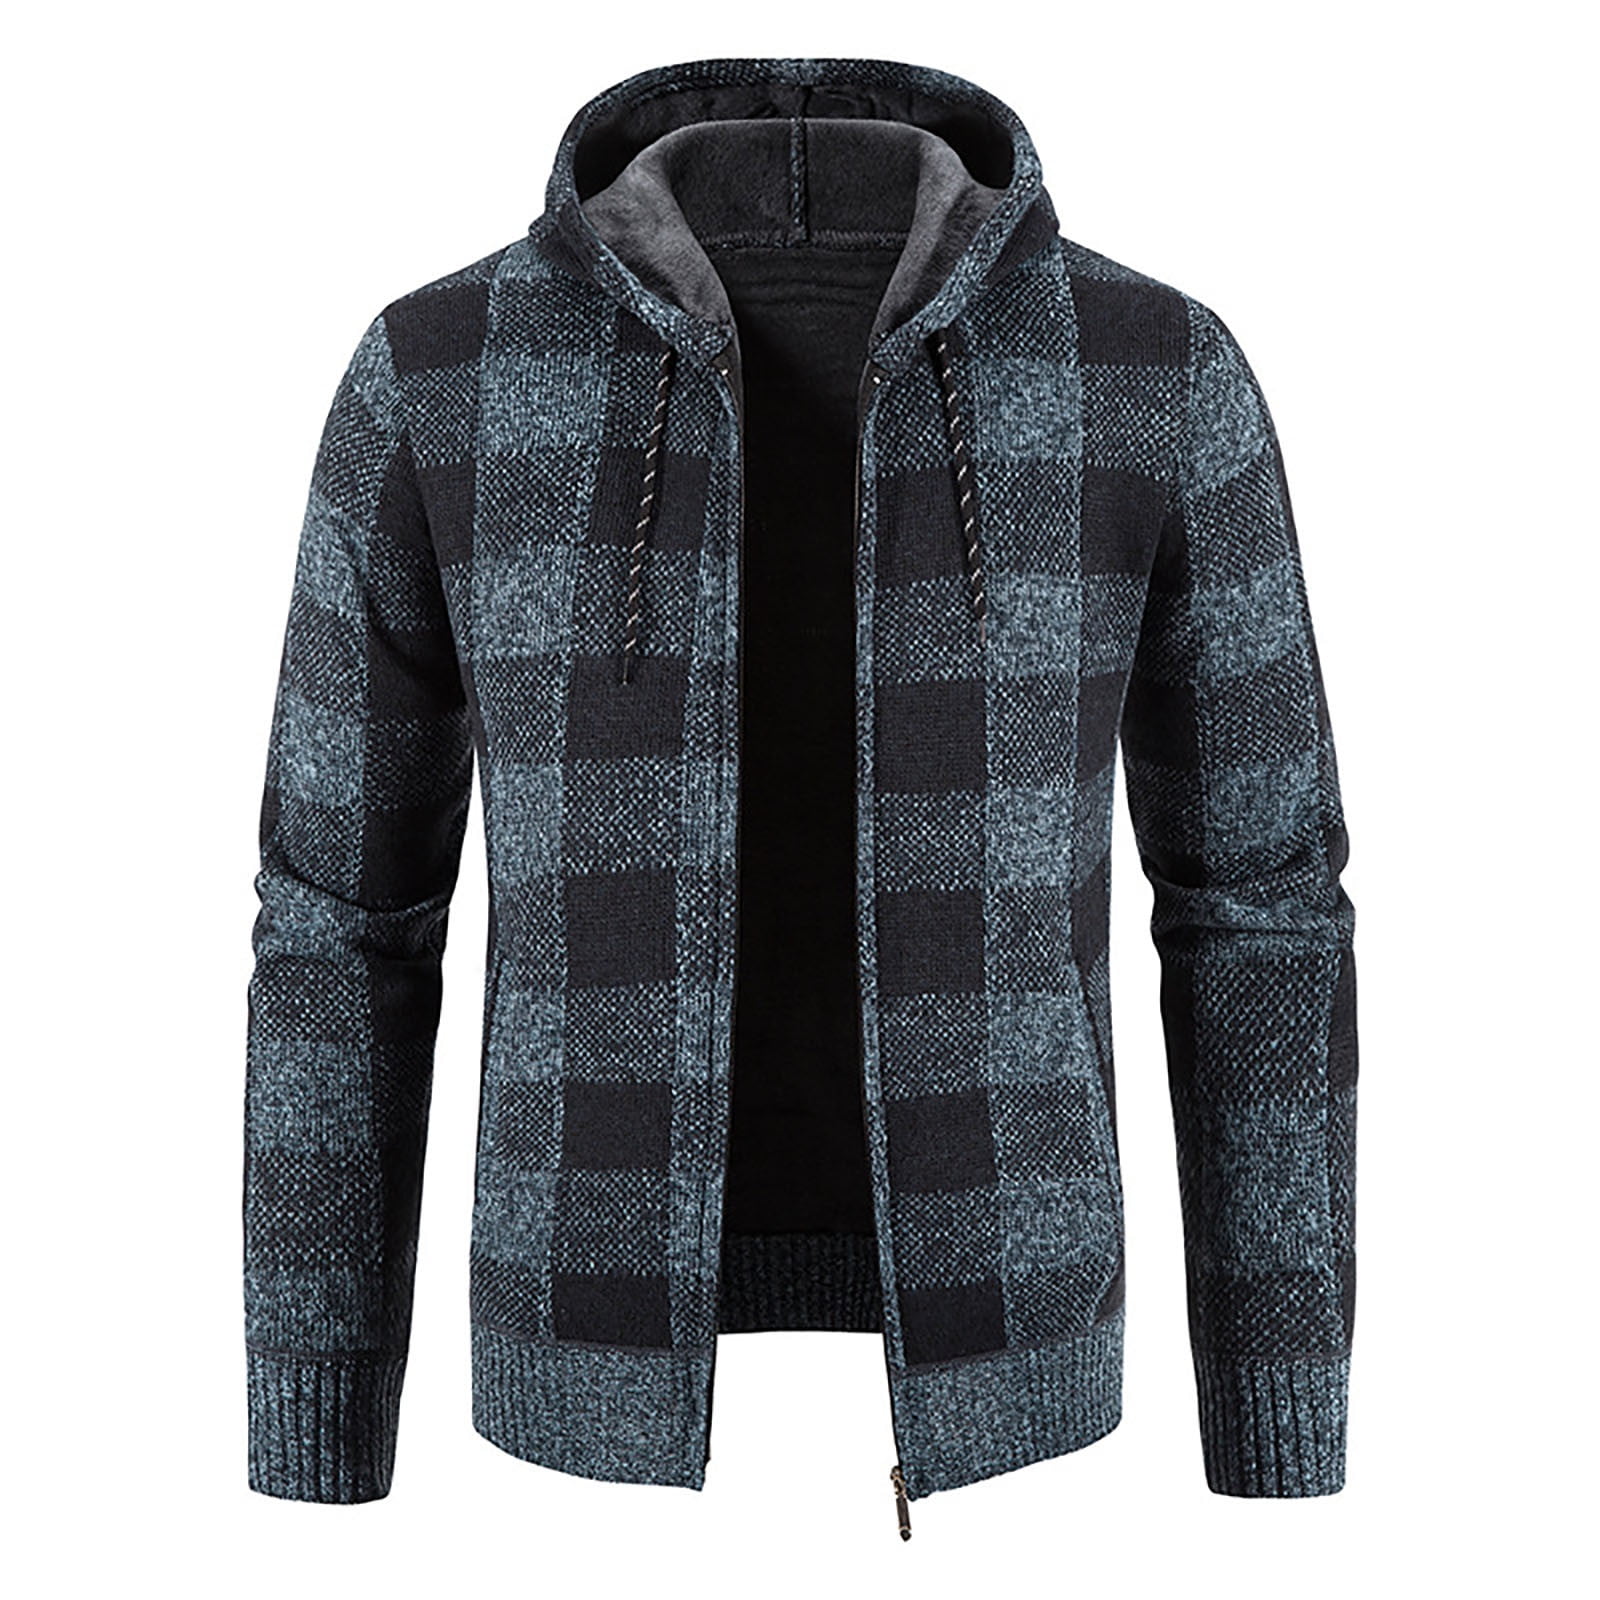 YYDGH Men's Hooded Plaid Coats Full Zip Knitted Cardigan Sweater